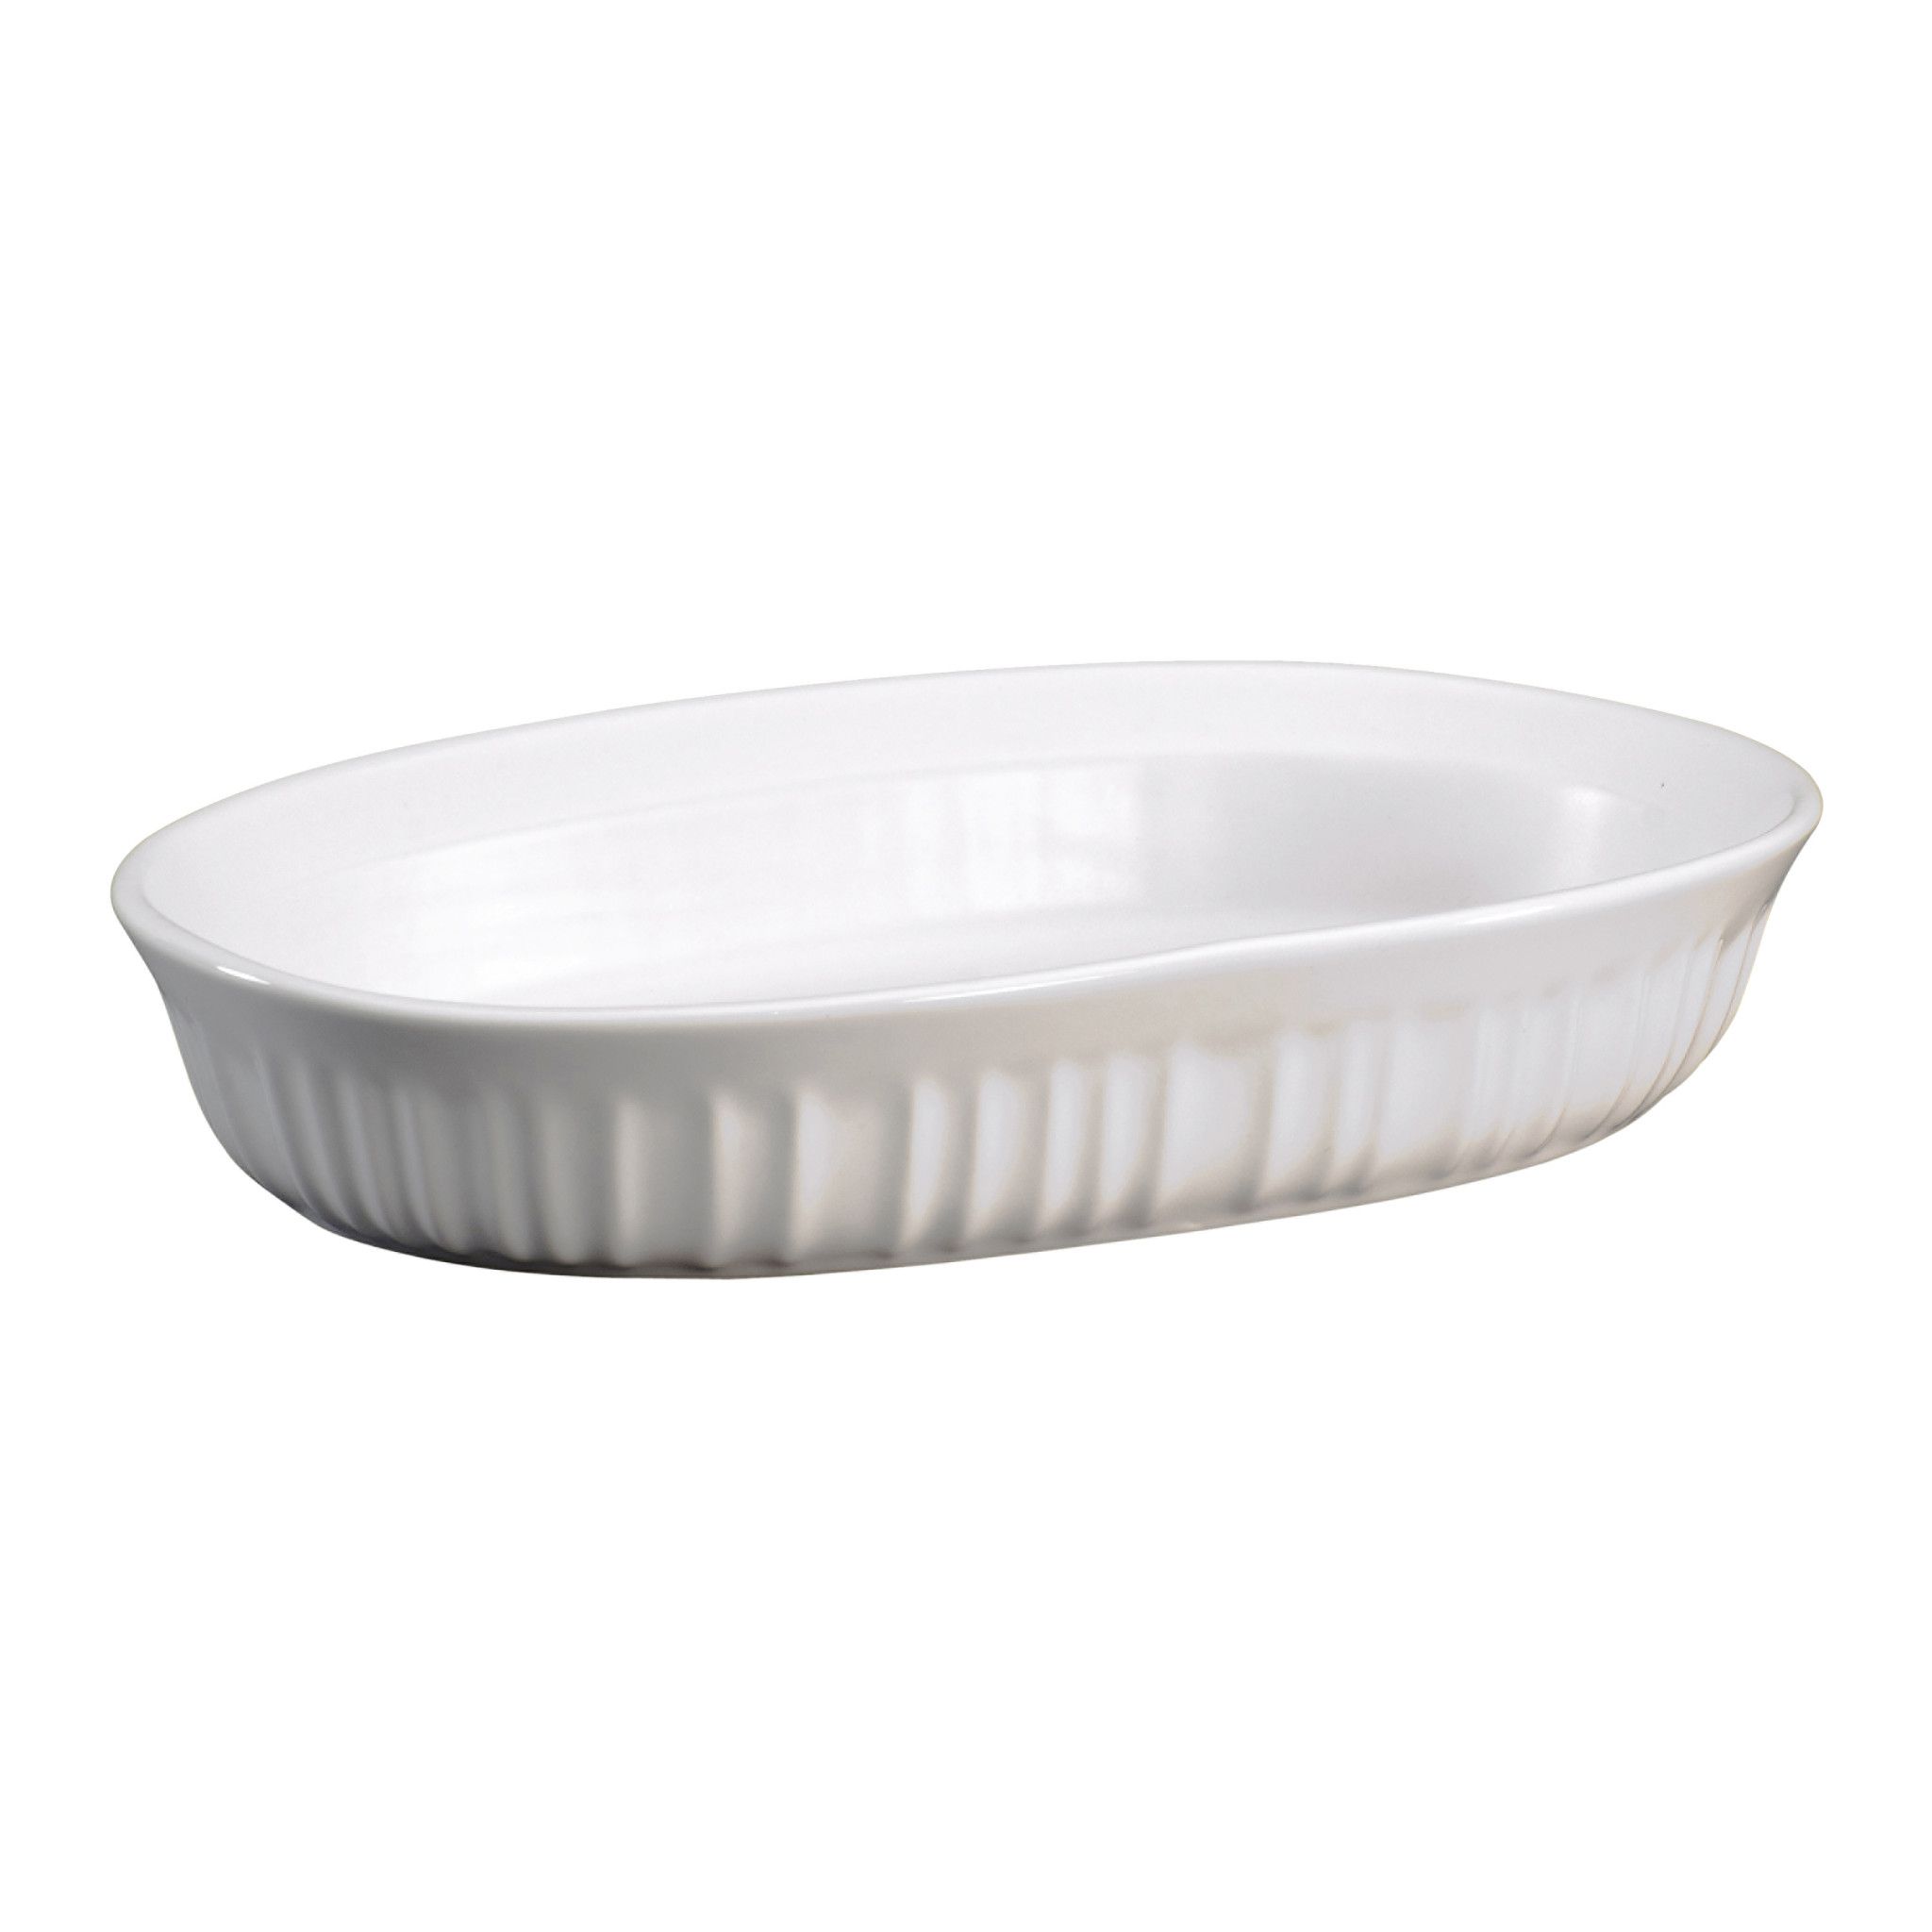 FRENCH WHITE OVAL CORNING WARE LOW CASSEROLE BAKER 1 LITER F 7 B 